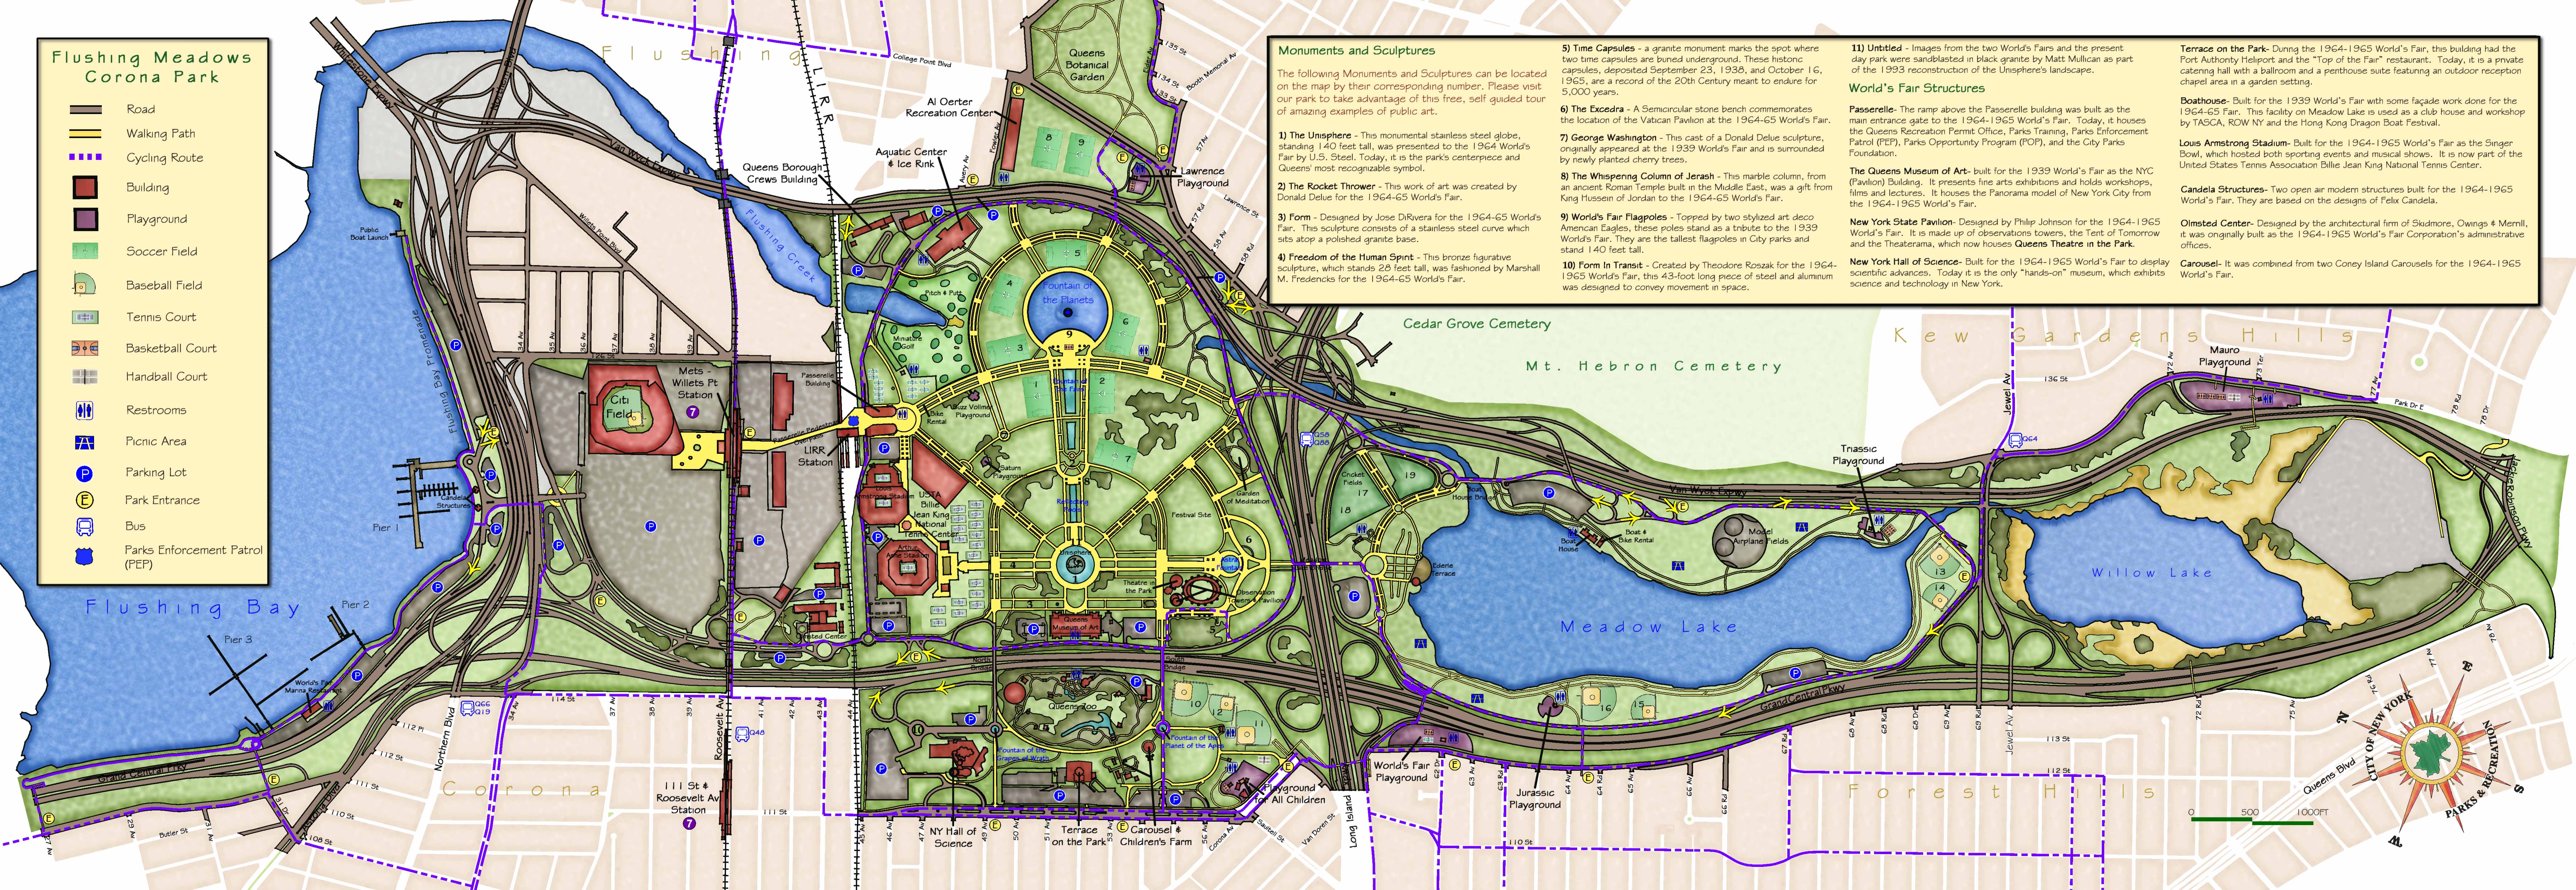 Map of present-day Flushing Meadows-Corona Park in Queens, New York